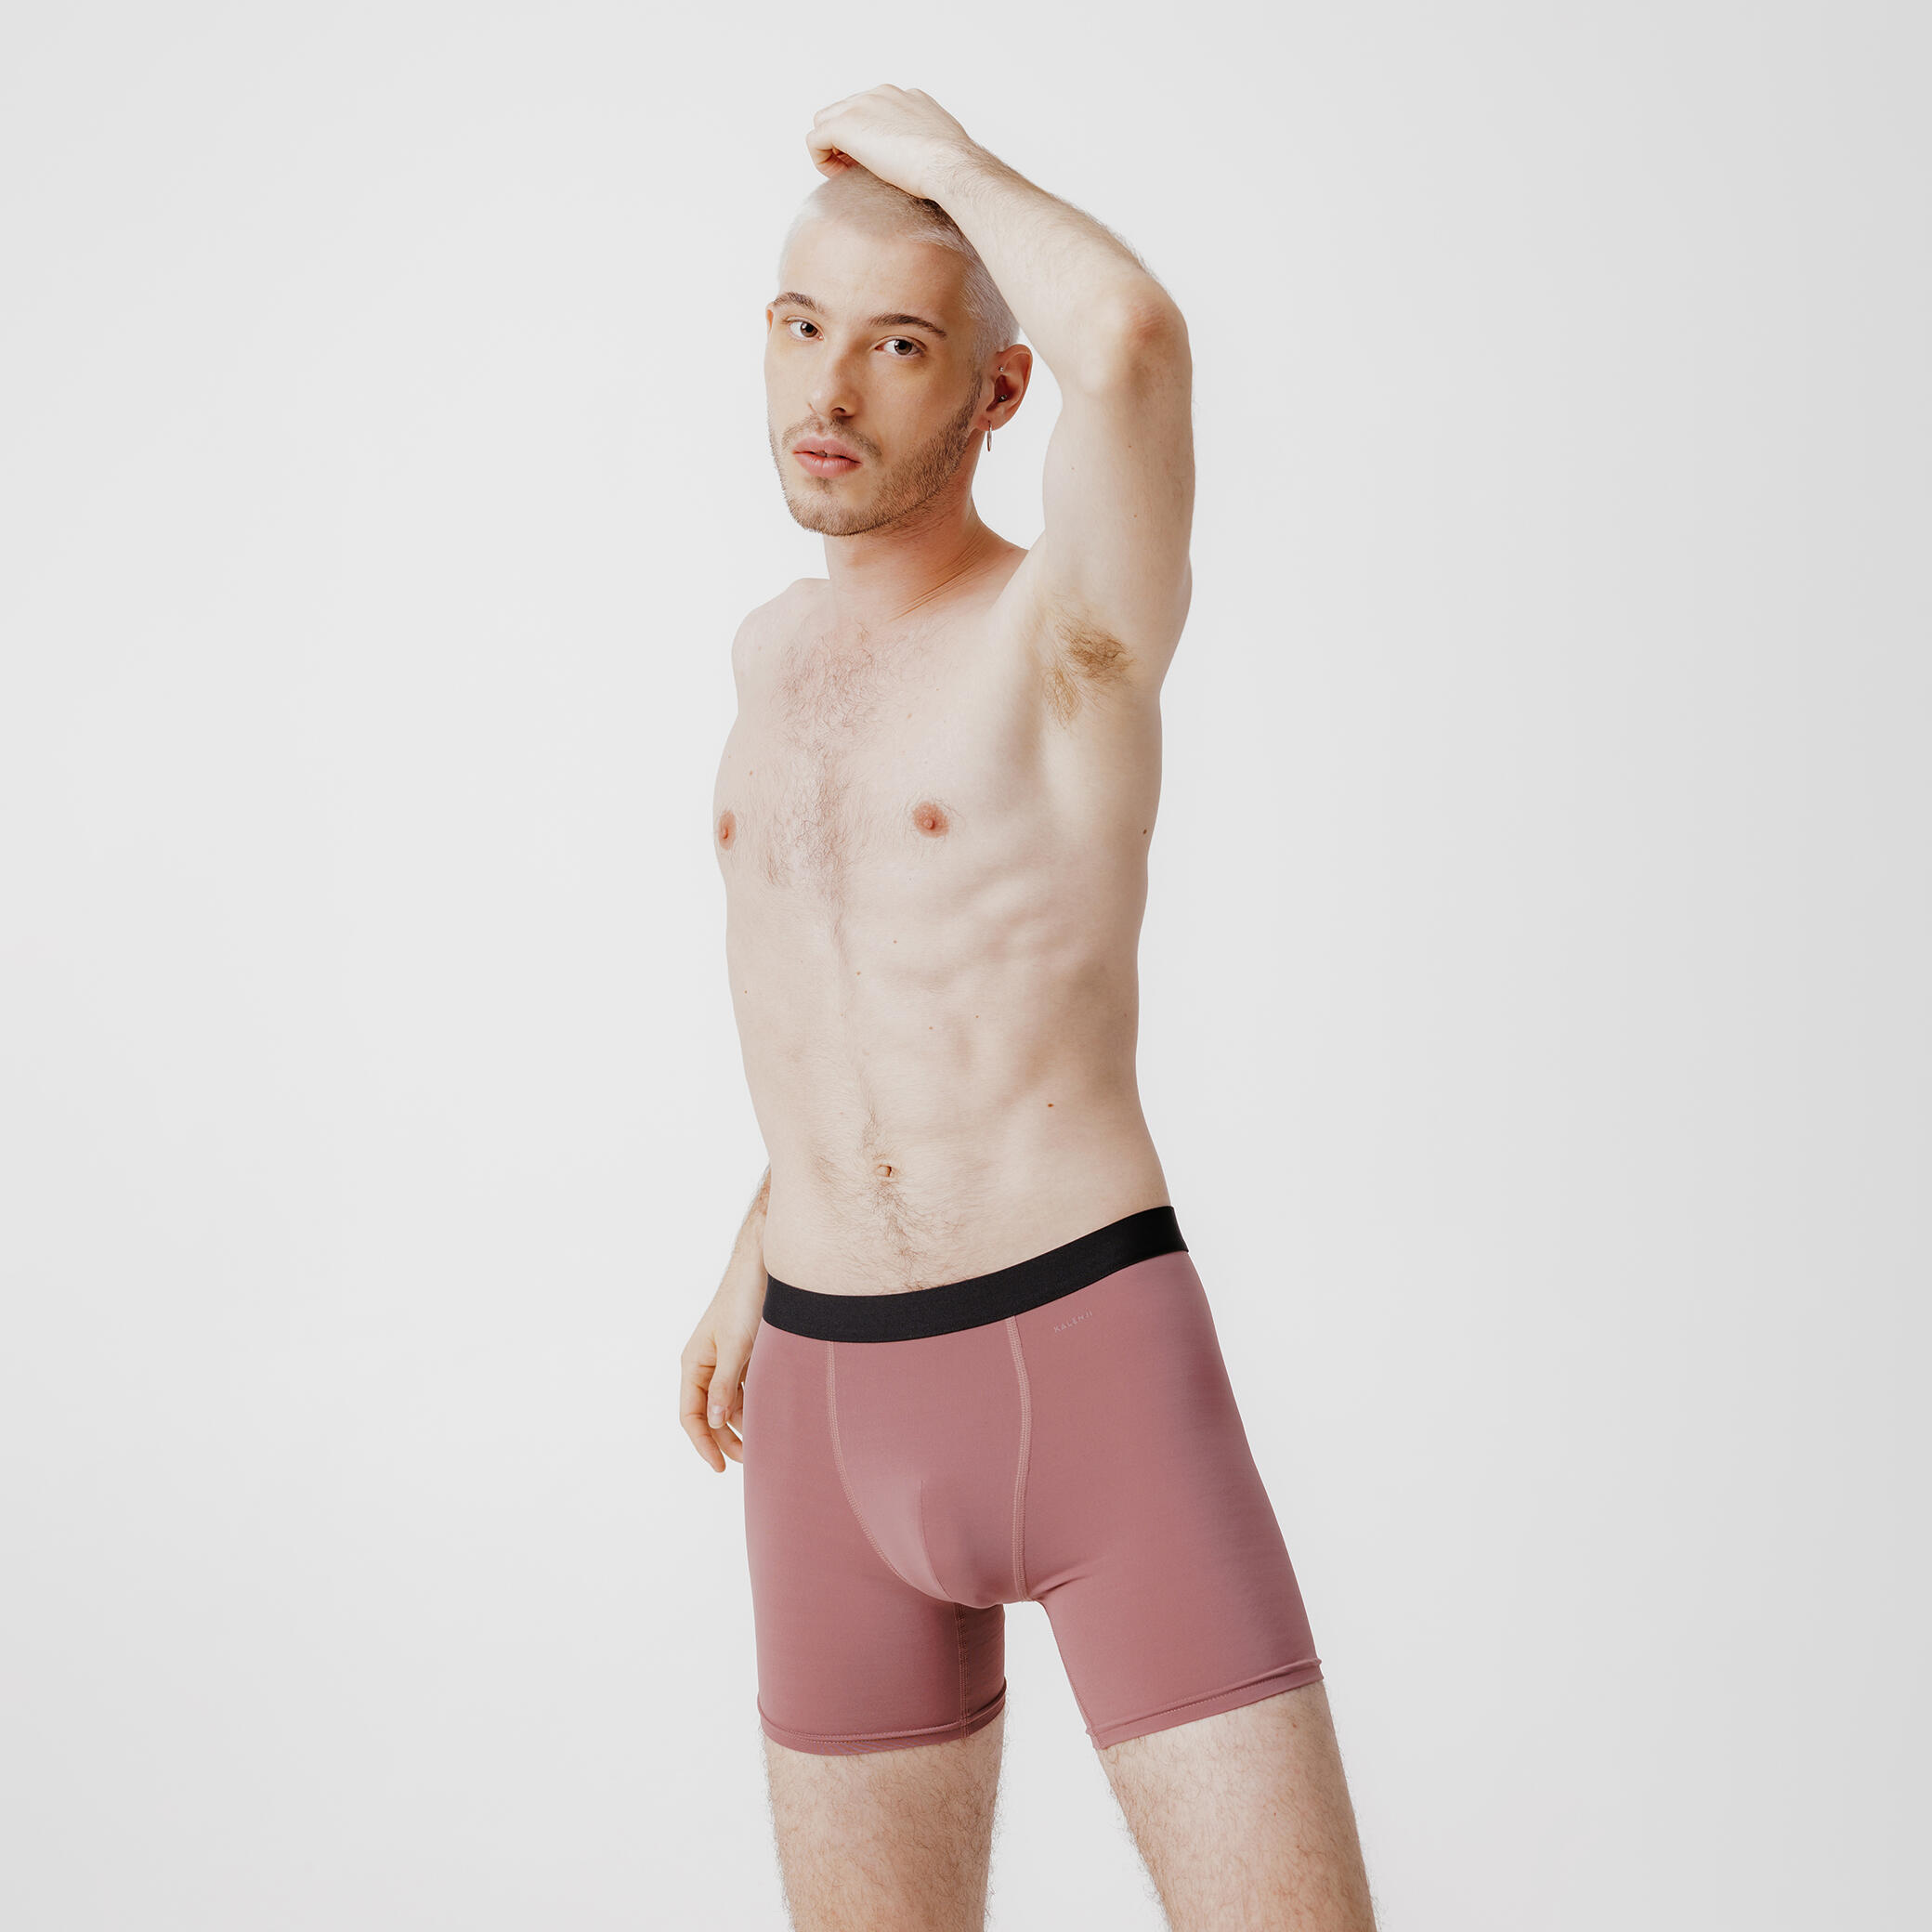 Men's breathable microfibre boxers - Taupe pink 4/7